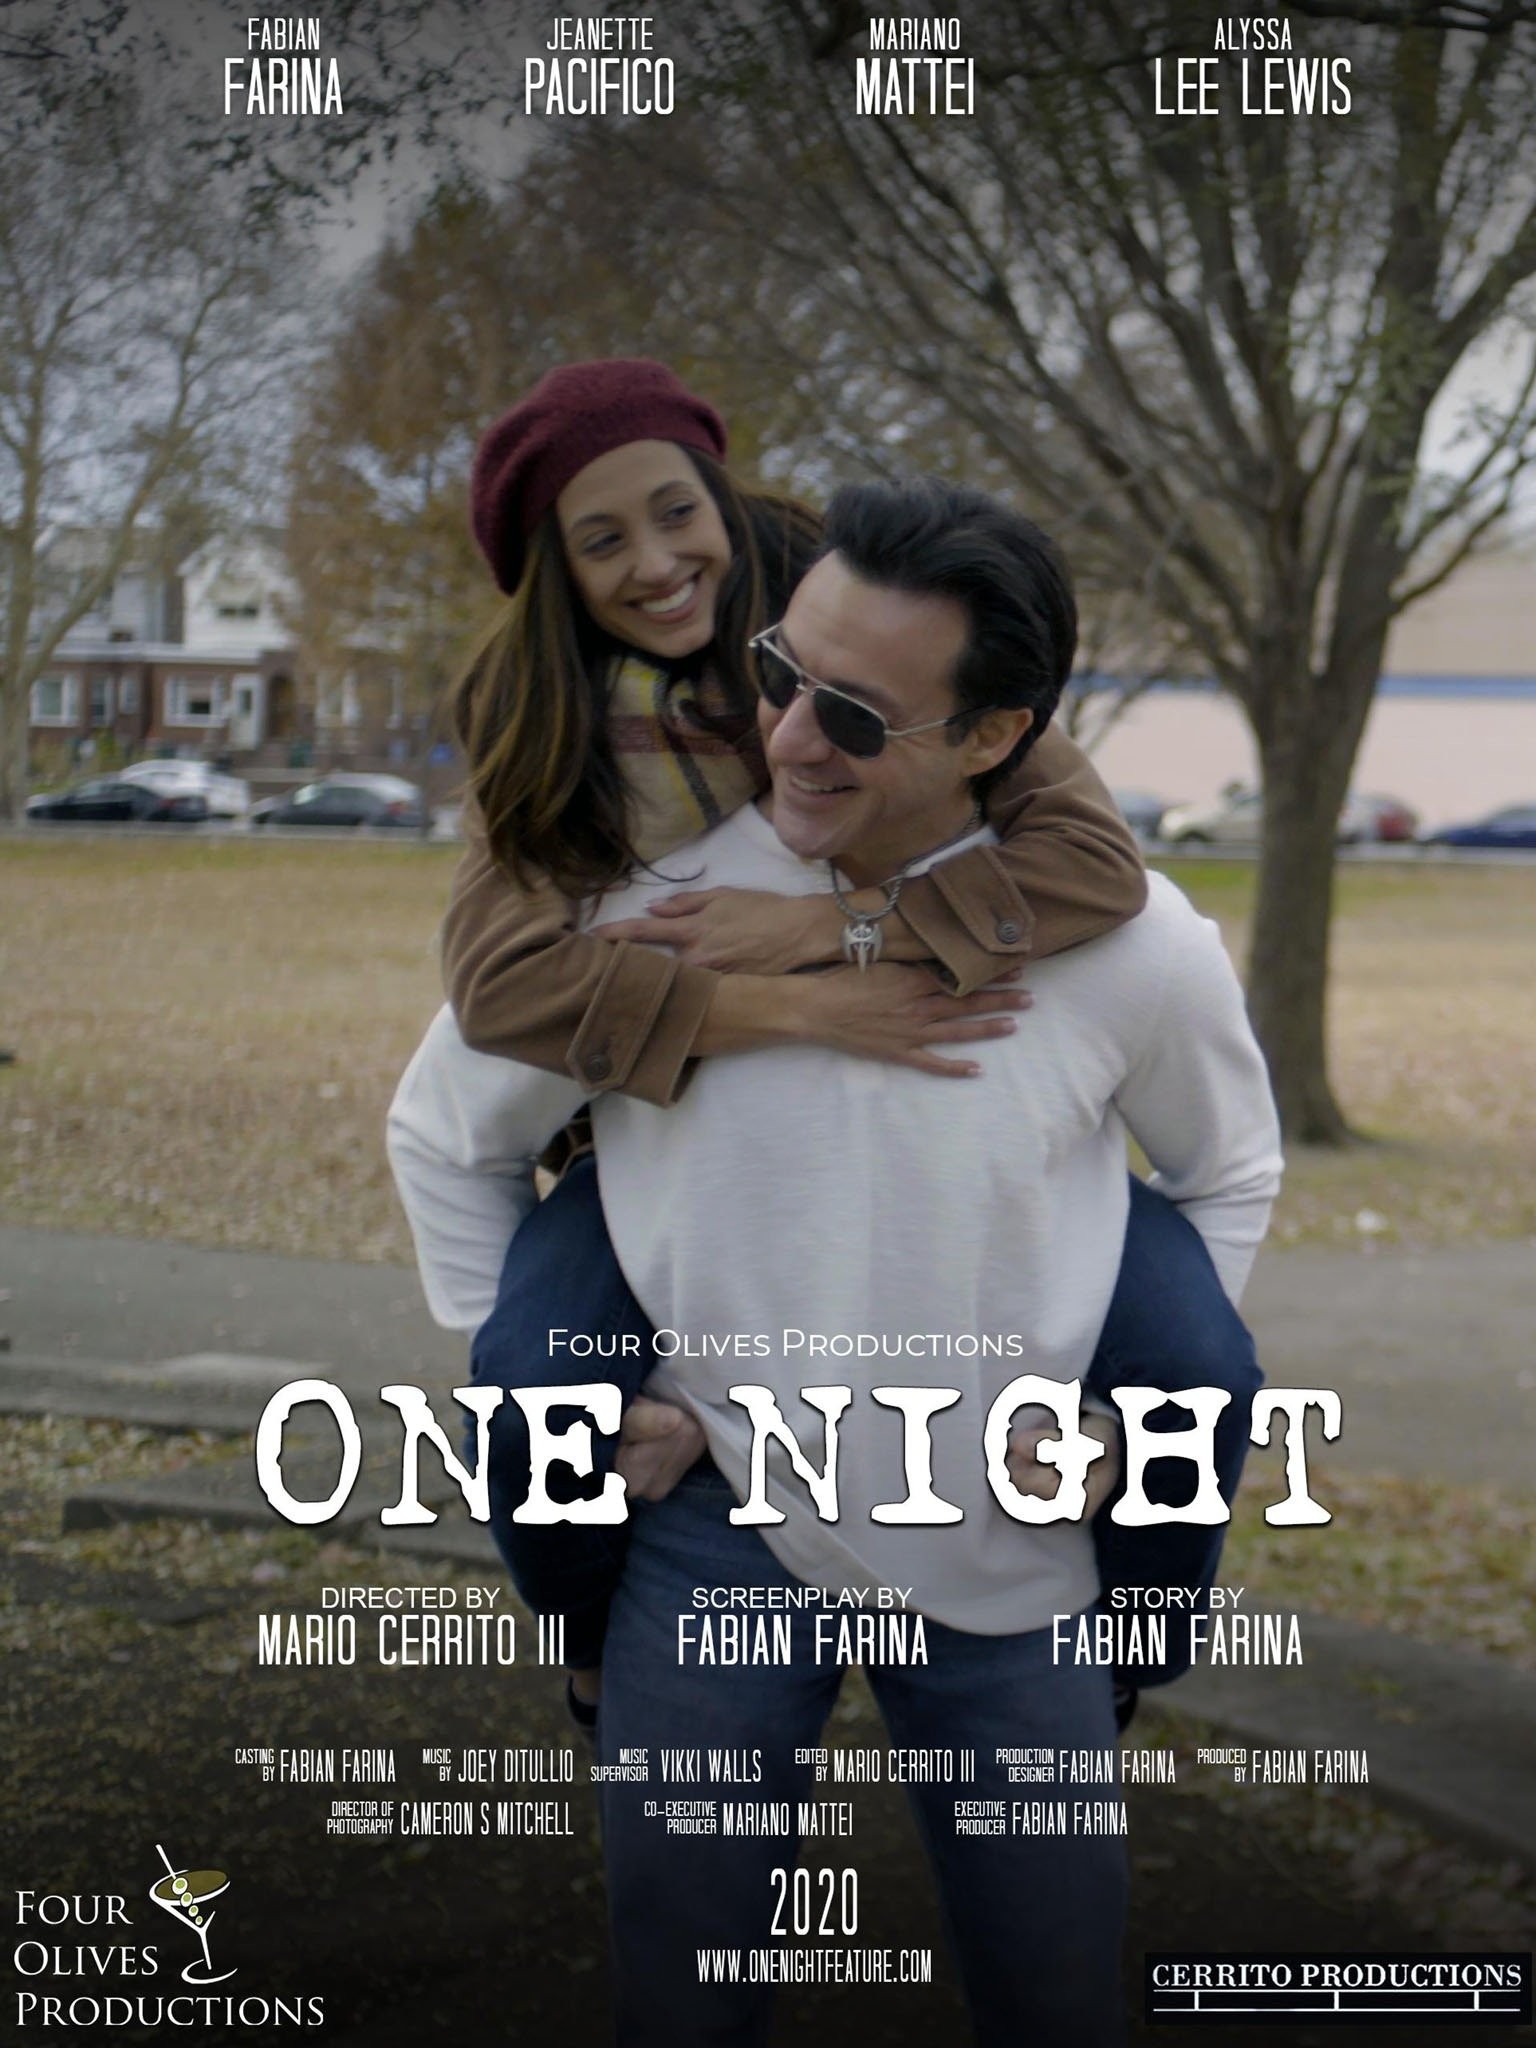 andrew gossack recommends 1 night full movie pic